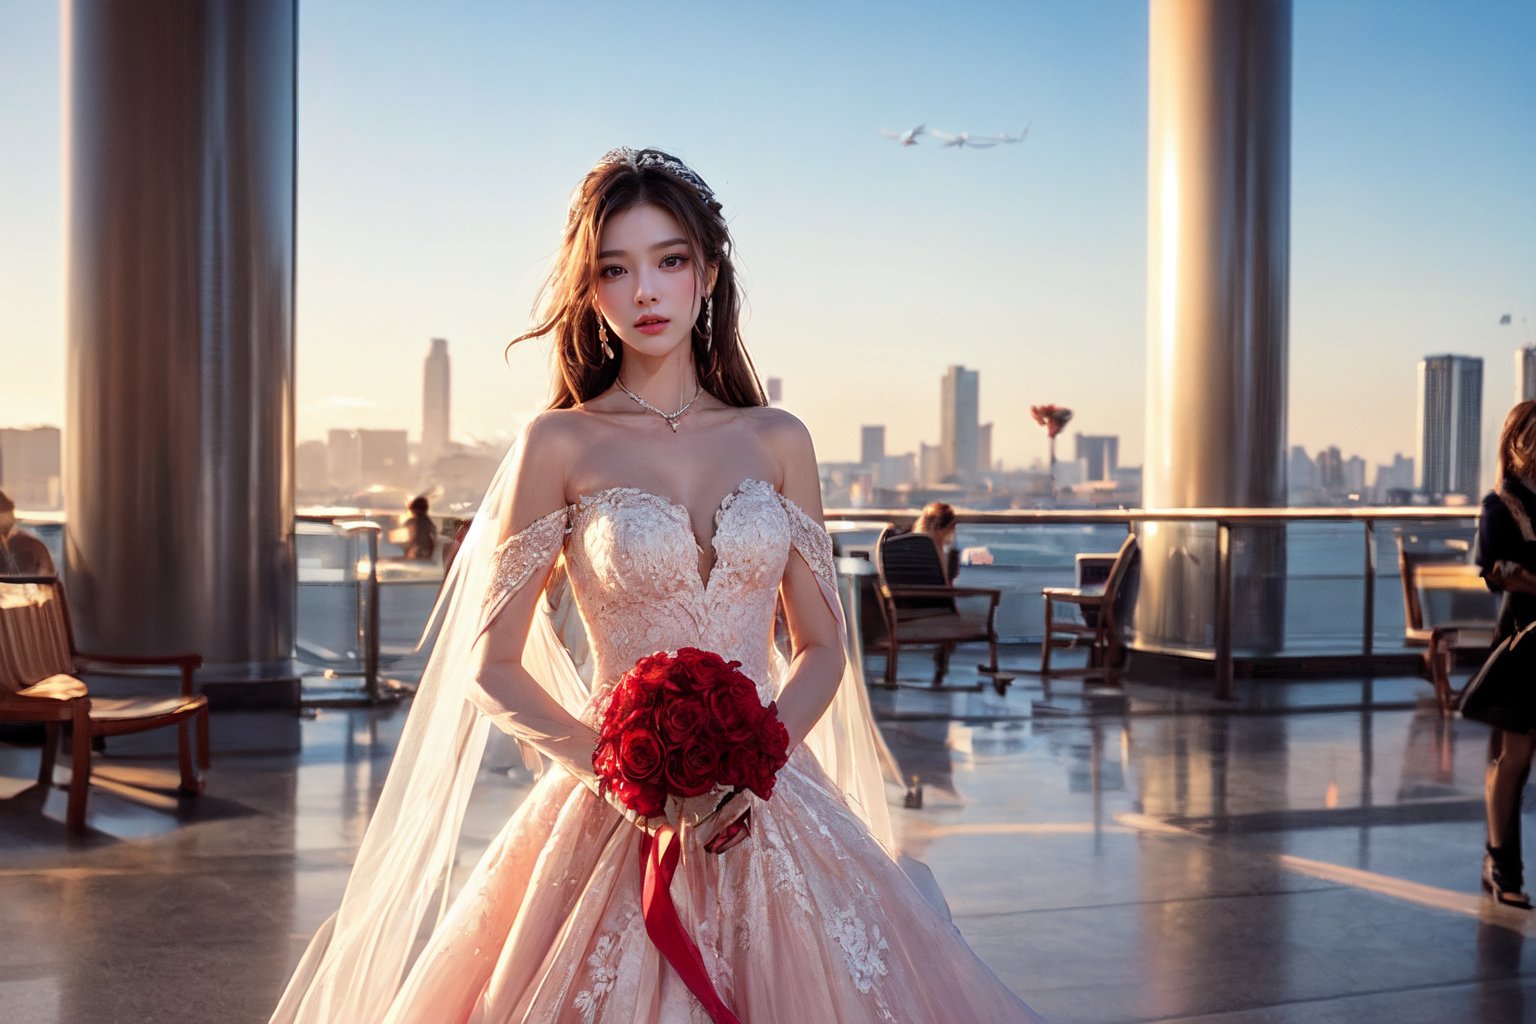 1 girl, wearing an exquisite low-cut pink lace wedding dress with medium bust, holding a bouquet of red roses. She stood on the airport runway, facing the audience, with a large passenger plane flying low overhead. The background shows a city skyline at sunset, casting a warm glow over the entire scene. The runway stretched to the horizon, and another plane could be seen in the distance. The overall atmosphere combines elegance with surreal elements, an effect created by the juxtaposition of formal attire and the airport backdrop.